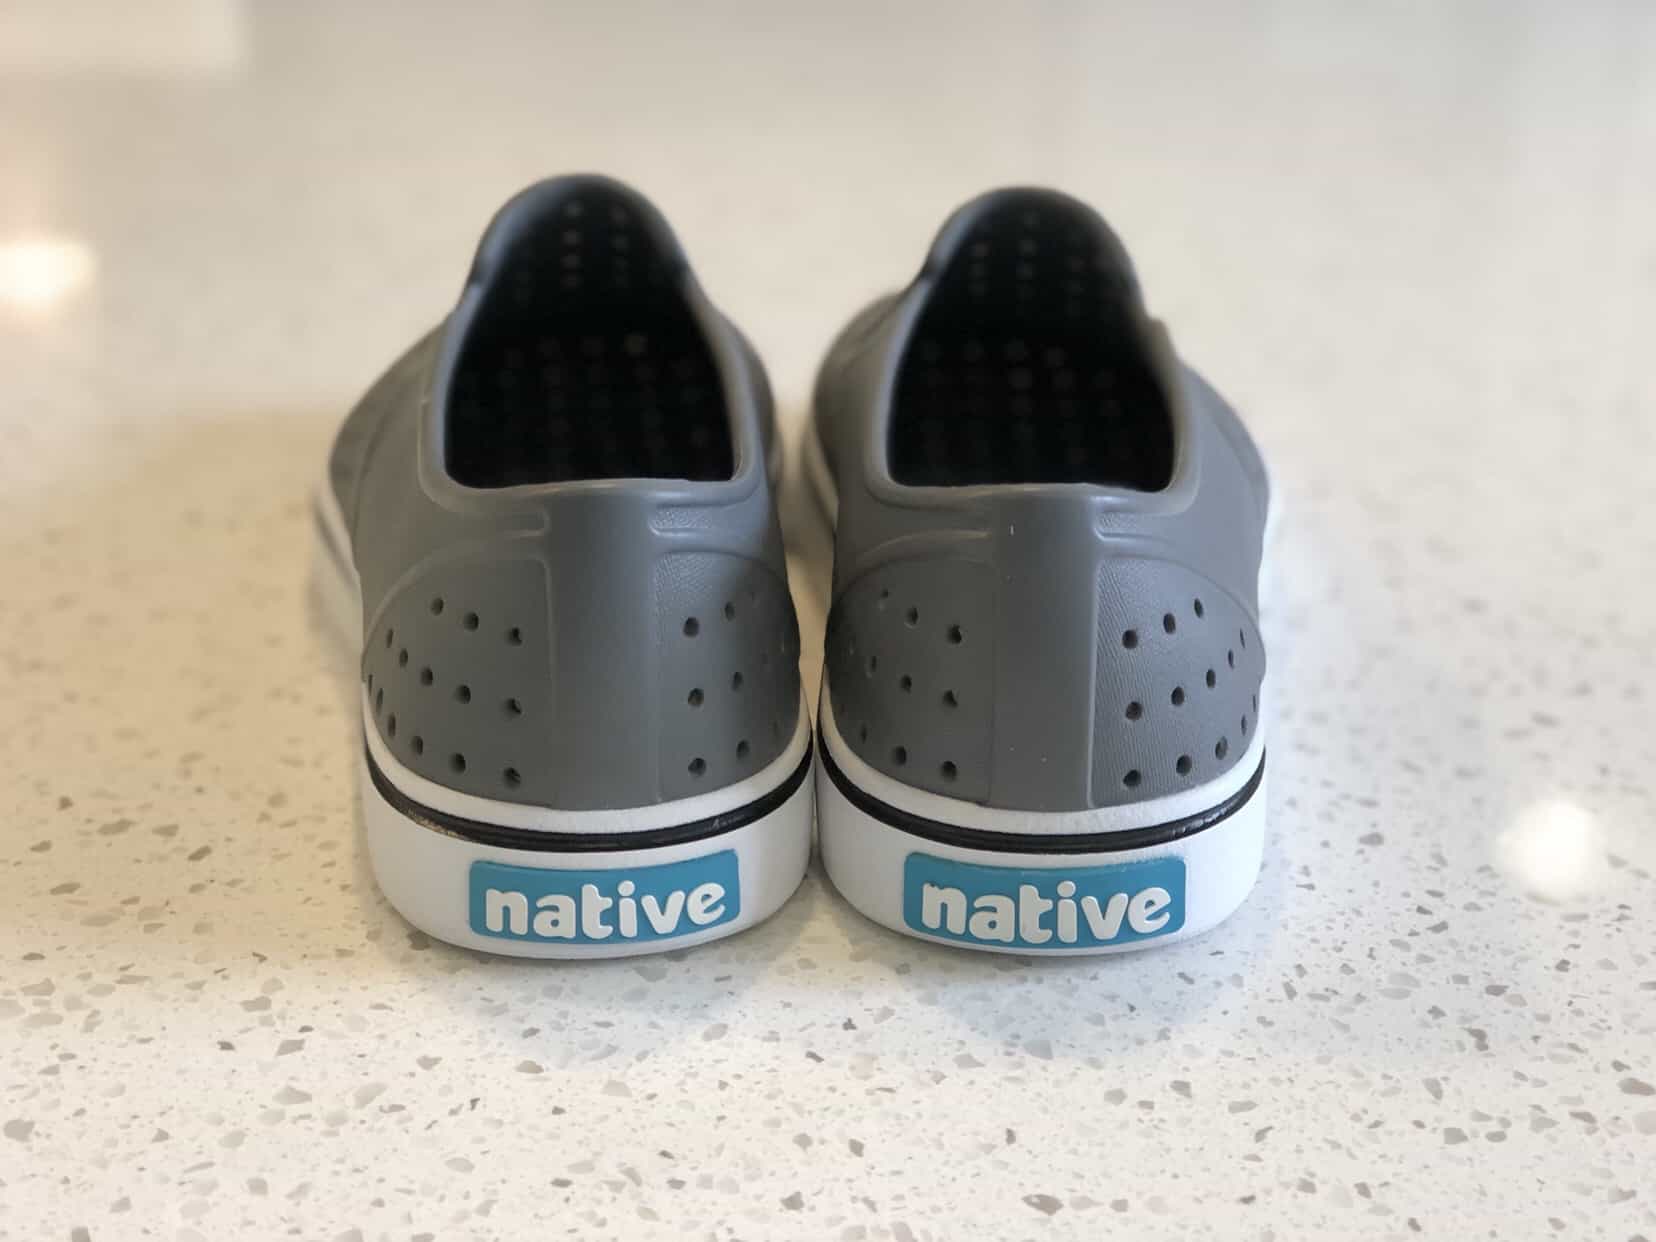 Native Shoe Review